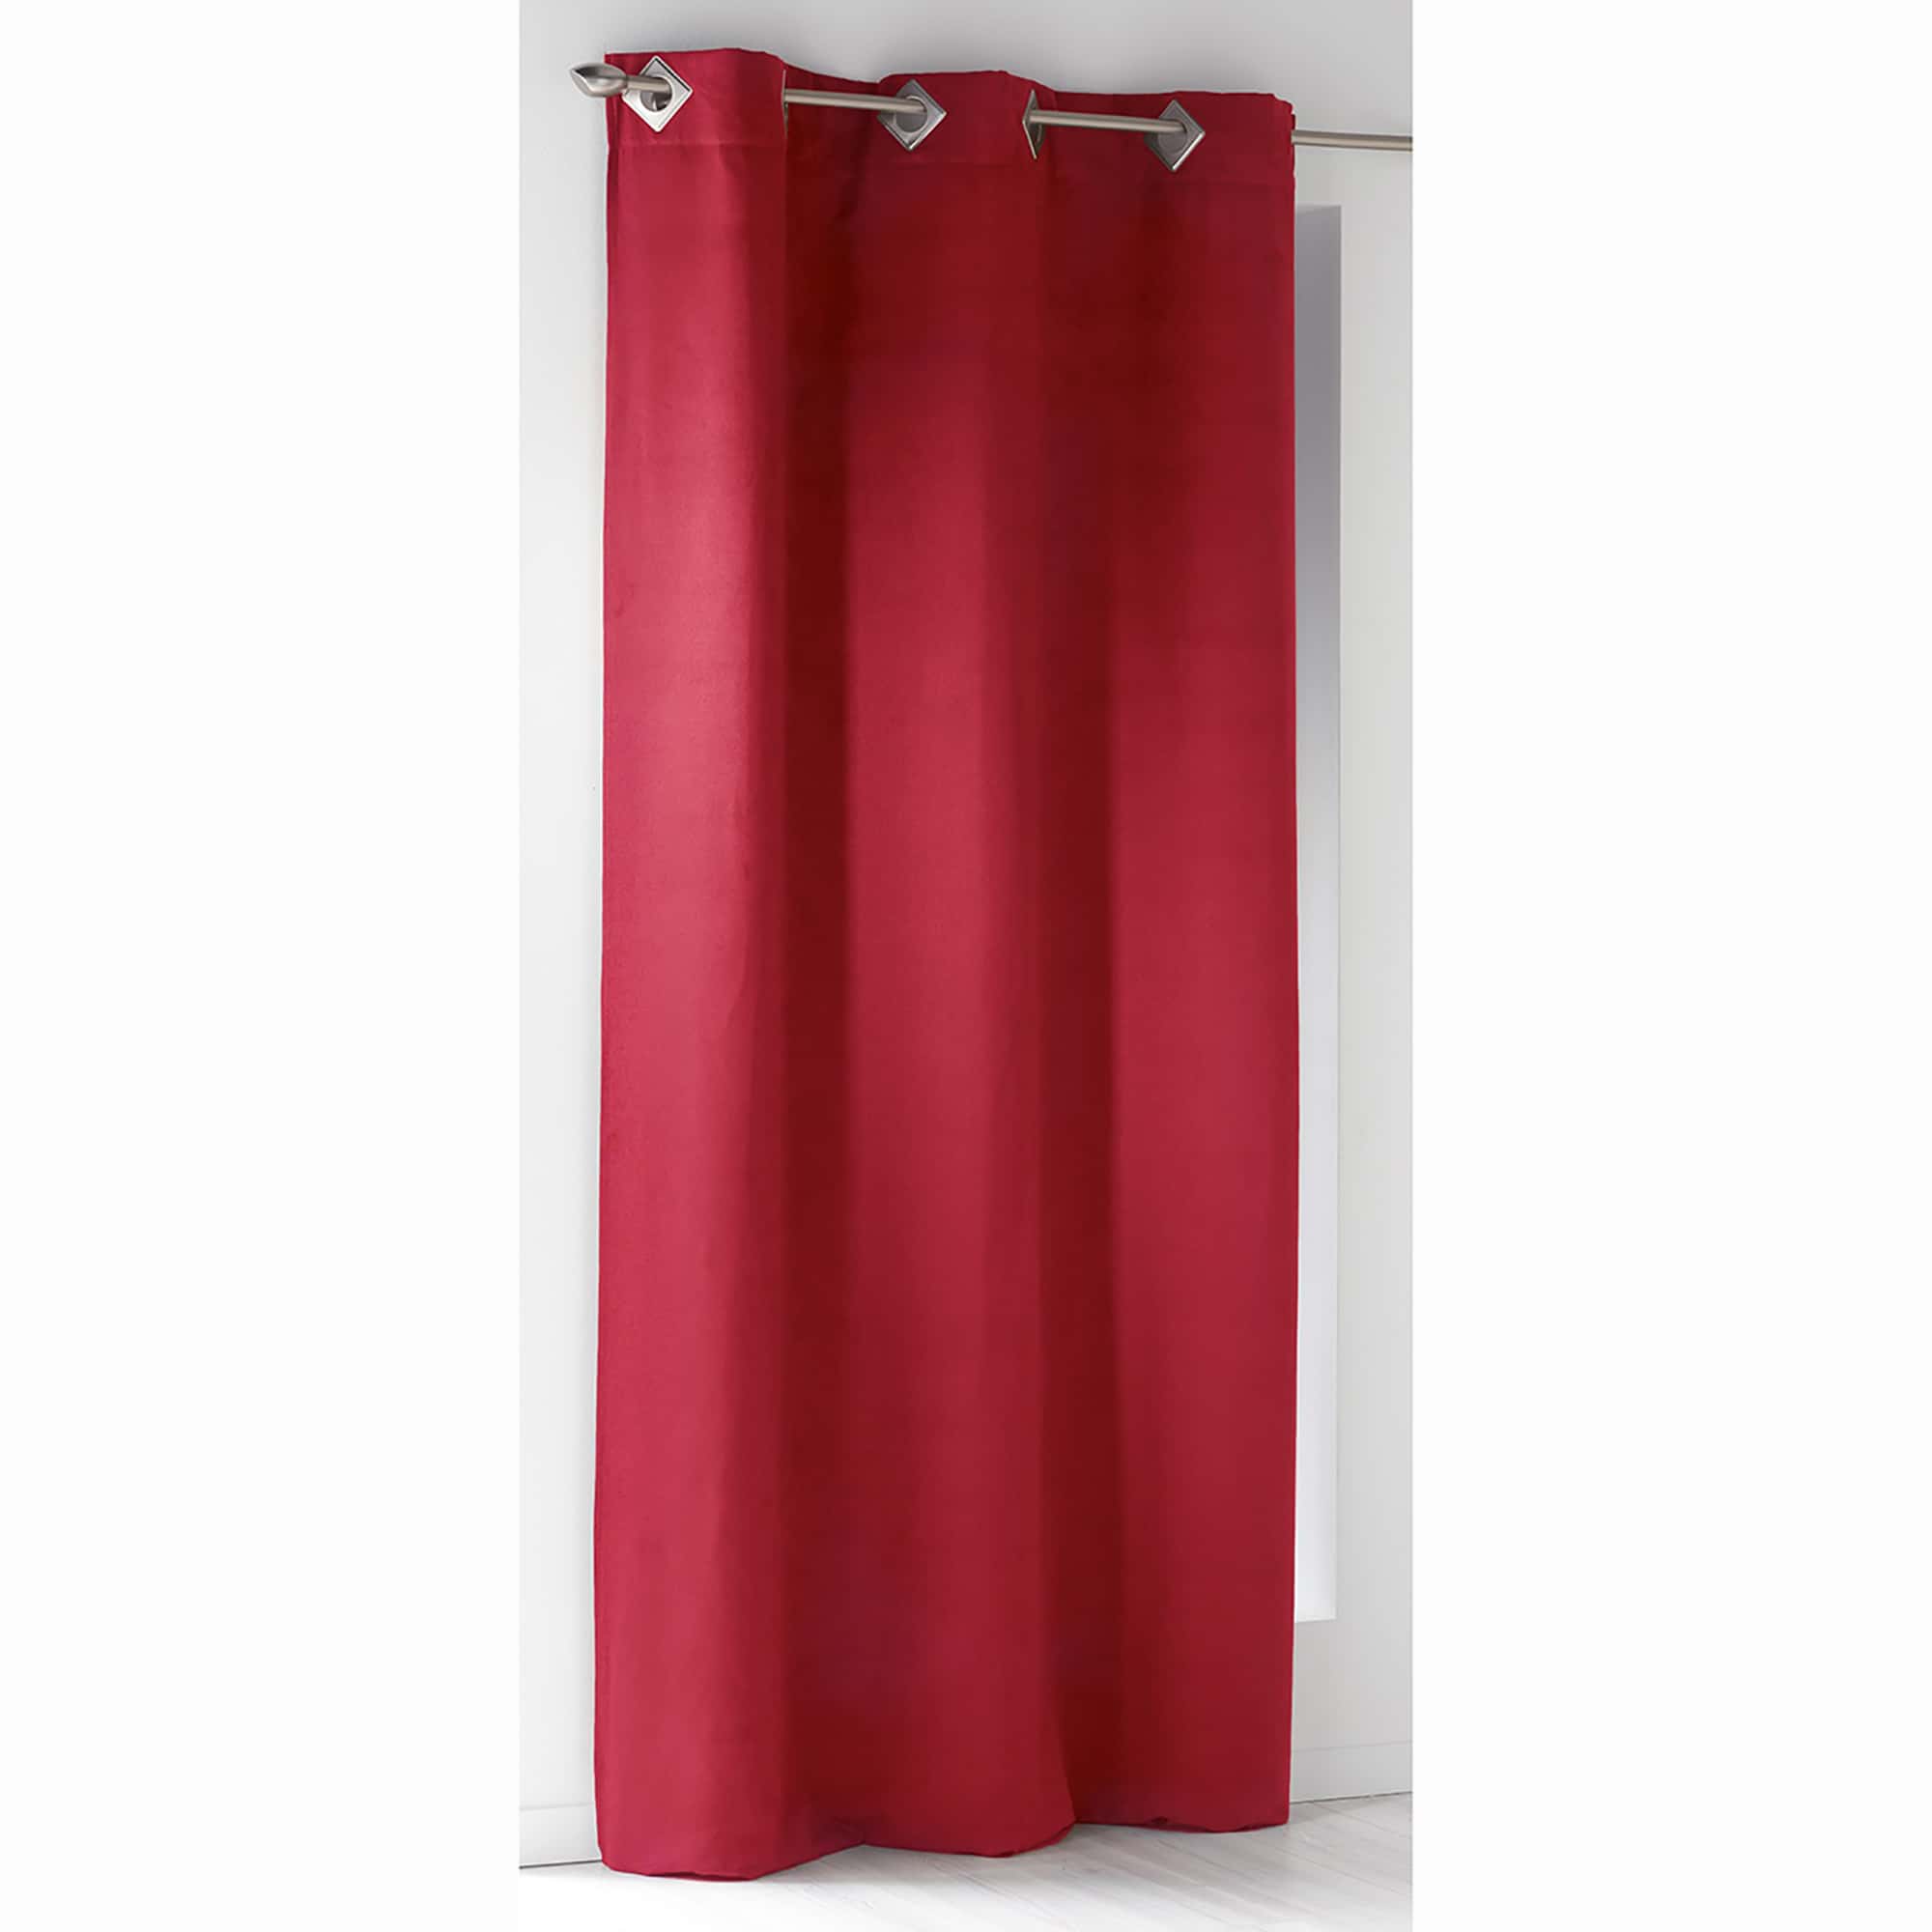 bright red window curtain panel x 1 imitation suede velvet effect for cozy decor